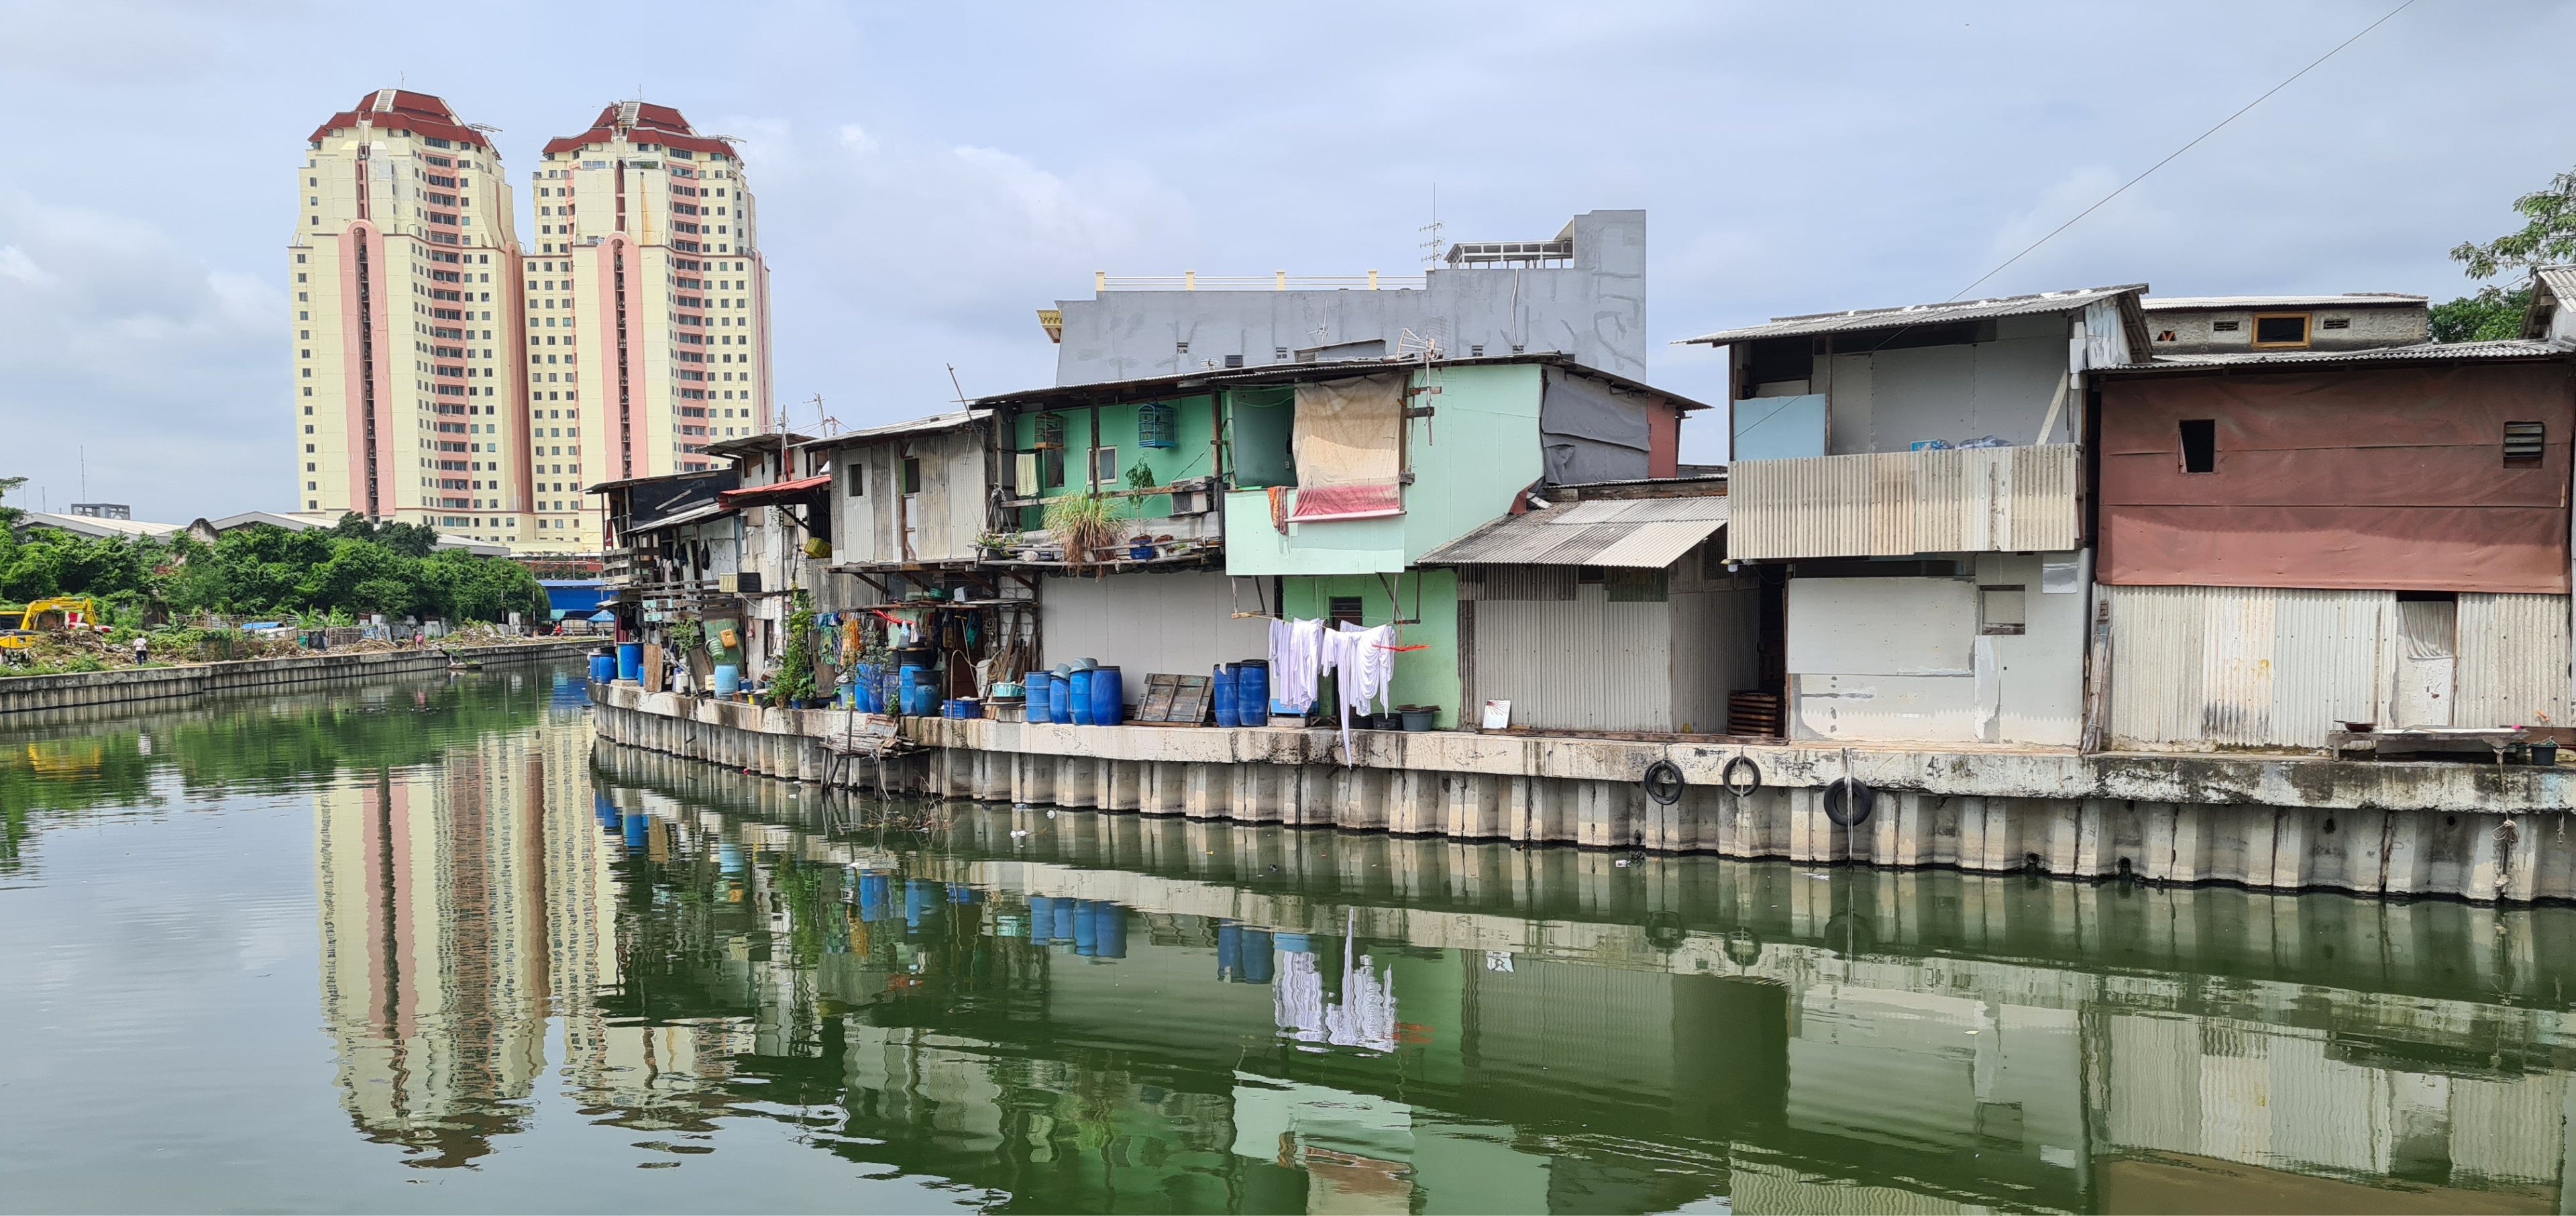 Simple houses along the canal in Jakarta